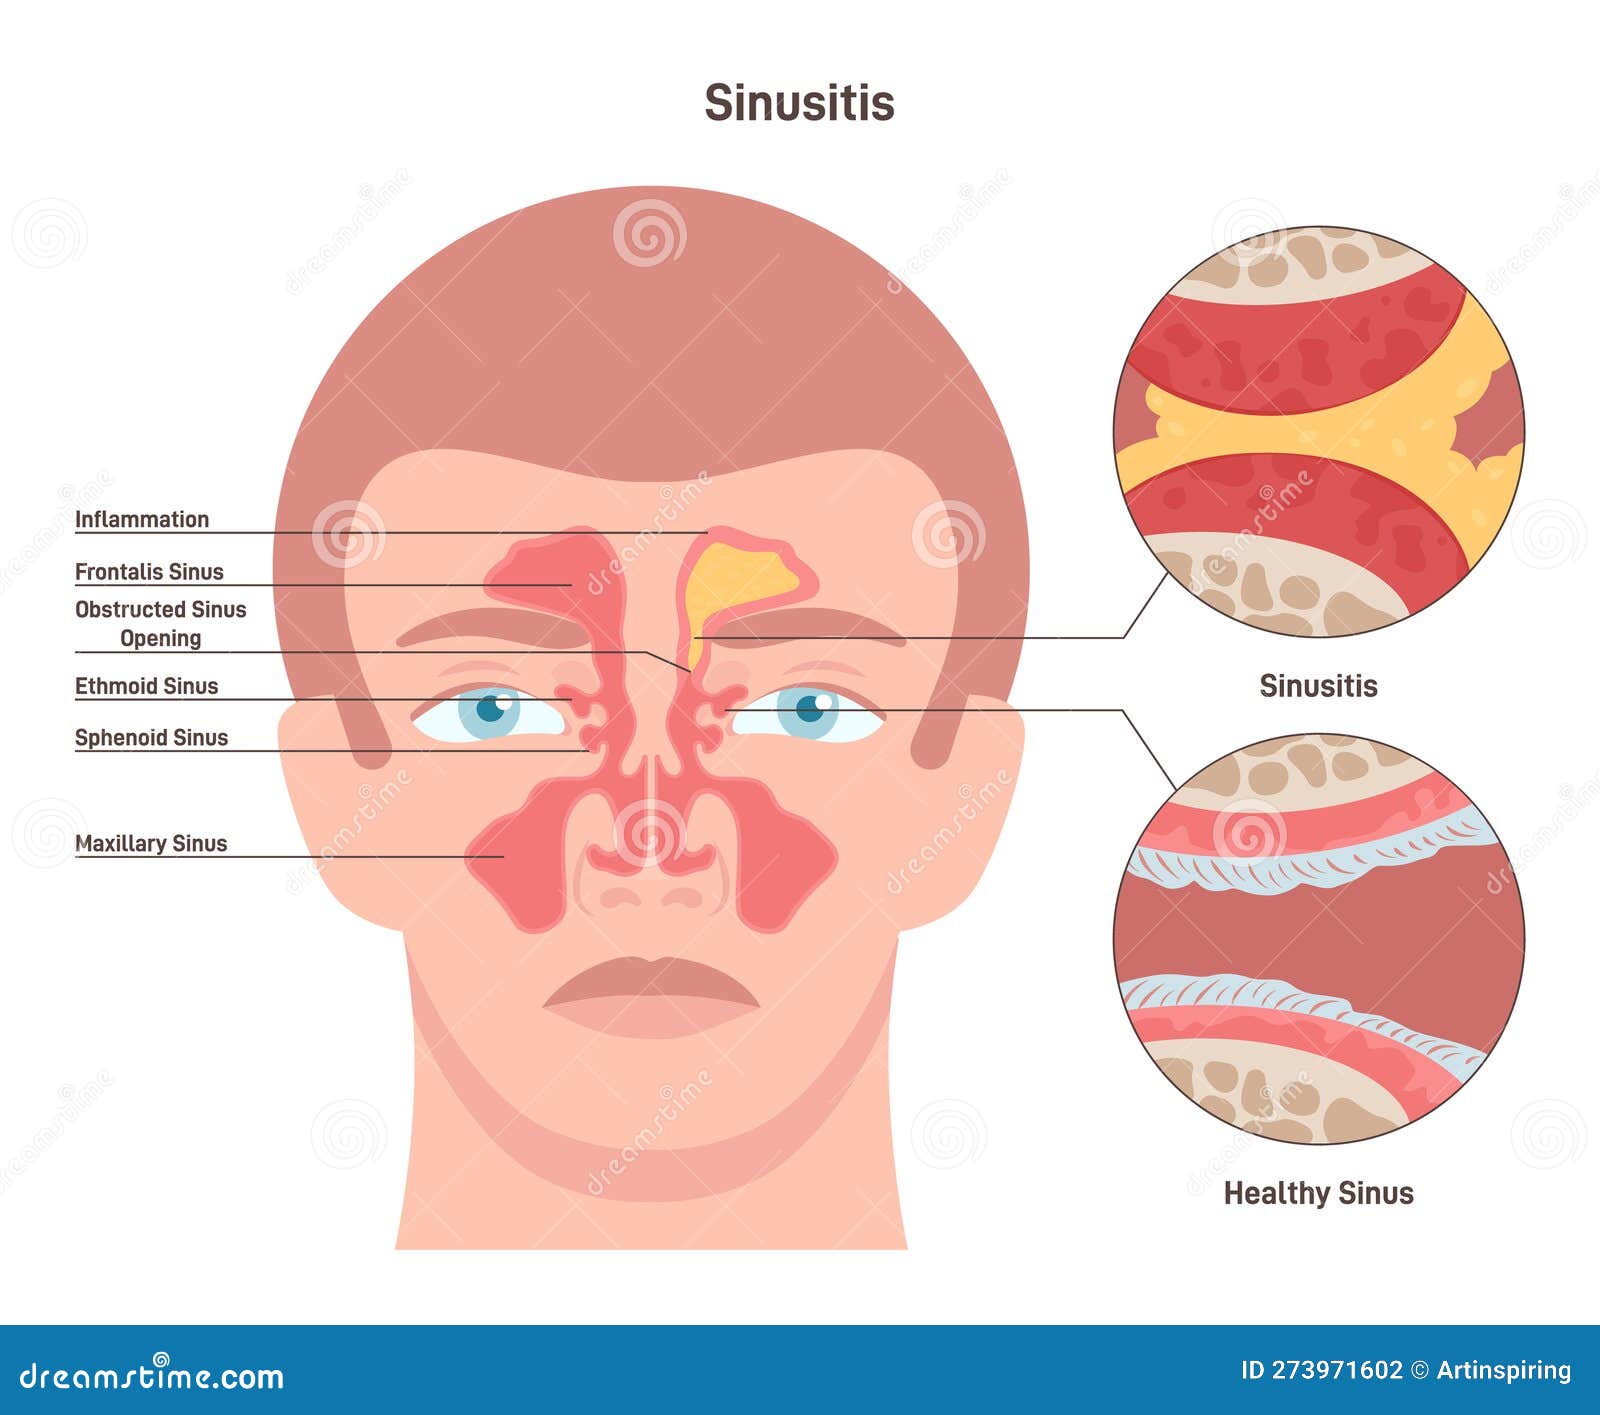 sinusitis. inflamed sinus with excess mucus and obstructed airways